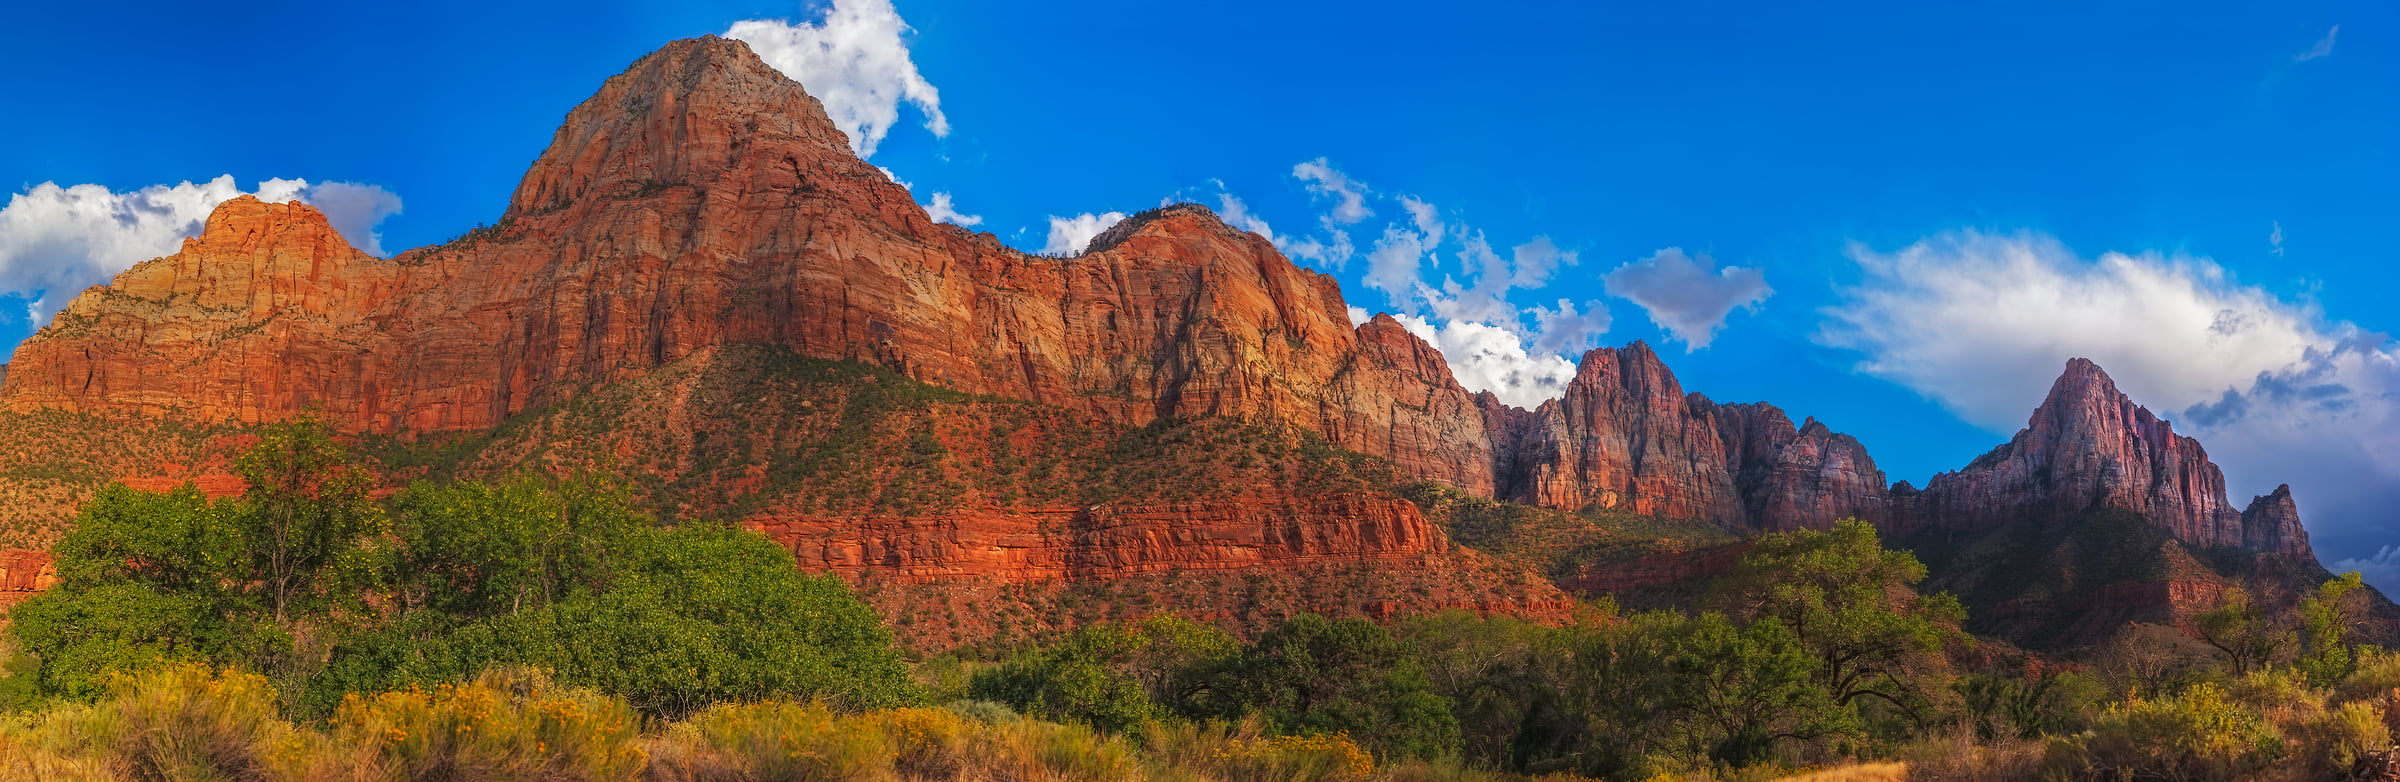 4,075 megapixels! A very high resolution, large-format VAST photo print of The Watchman mountain; landscape photograph created by John Freeman at Zion National Park, Utah.